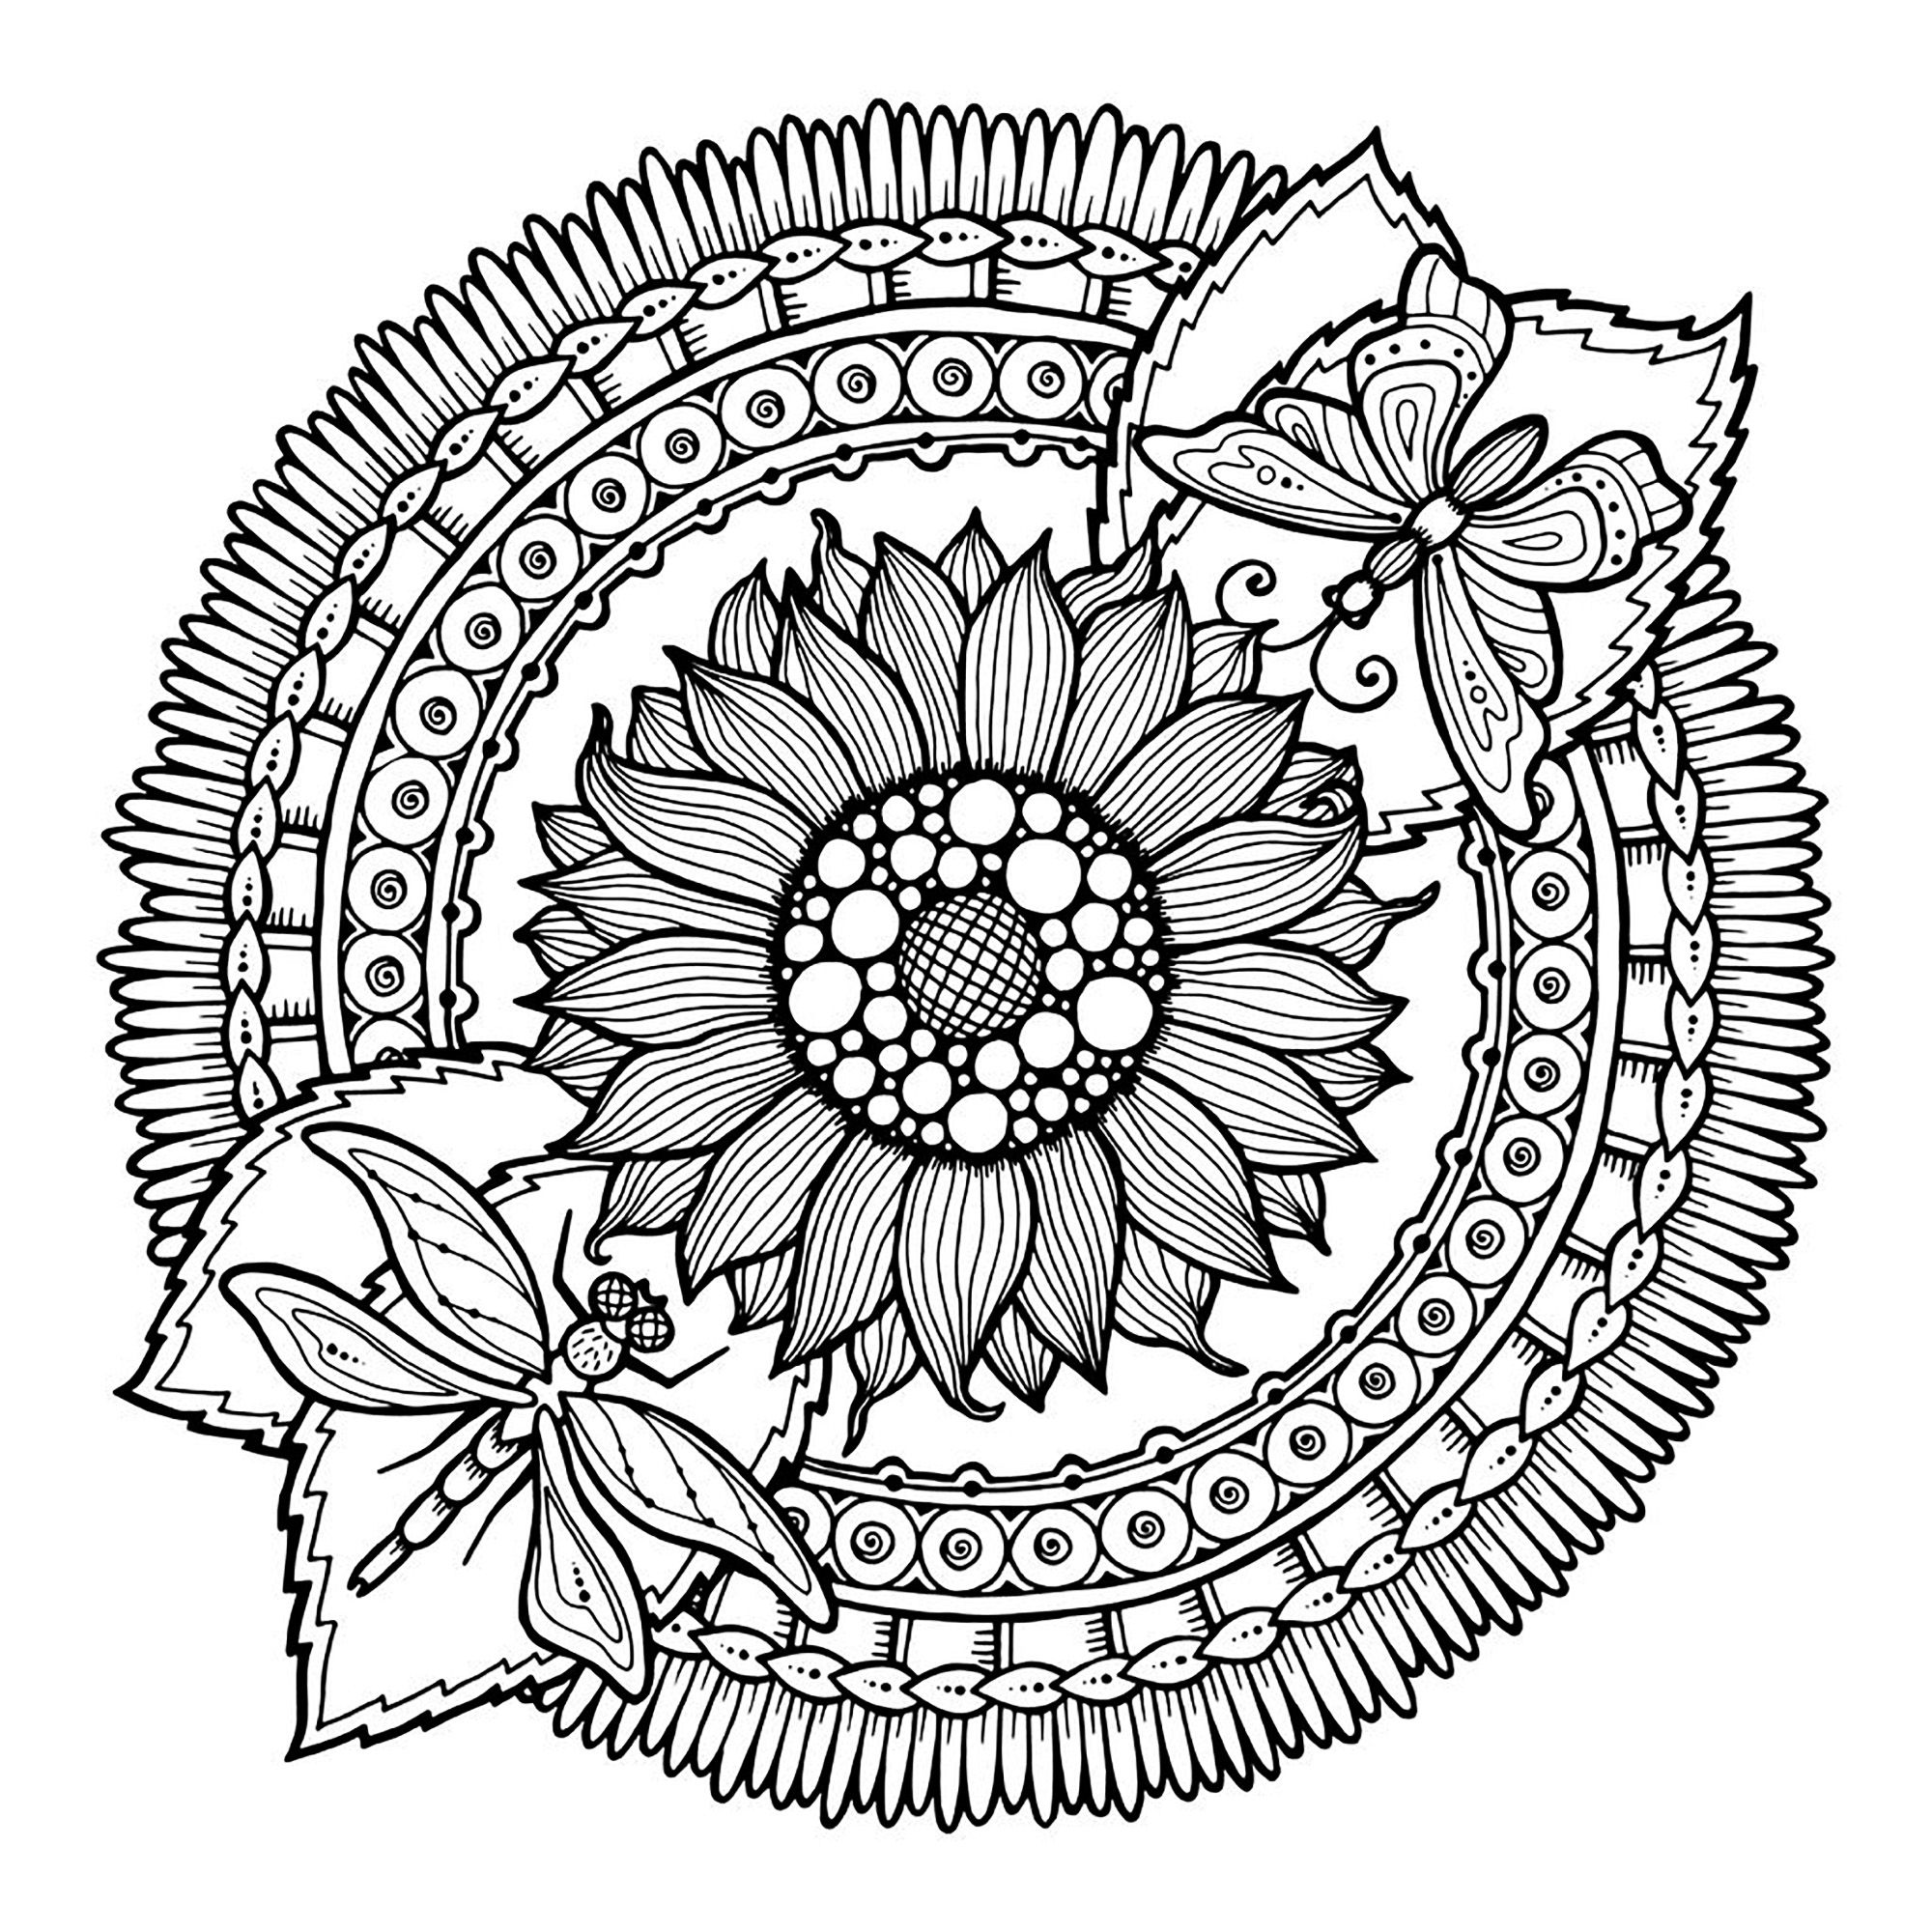 Download Two butterflies and a Sunflower in the middle - Difficult Mandalas (for adults) - 100% Mandalas ...